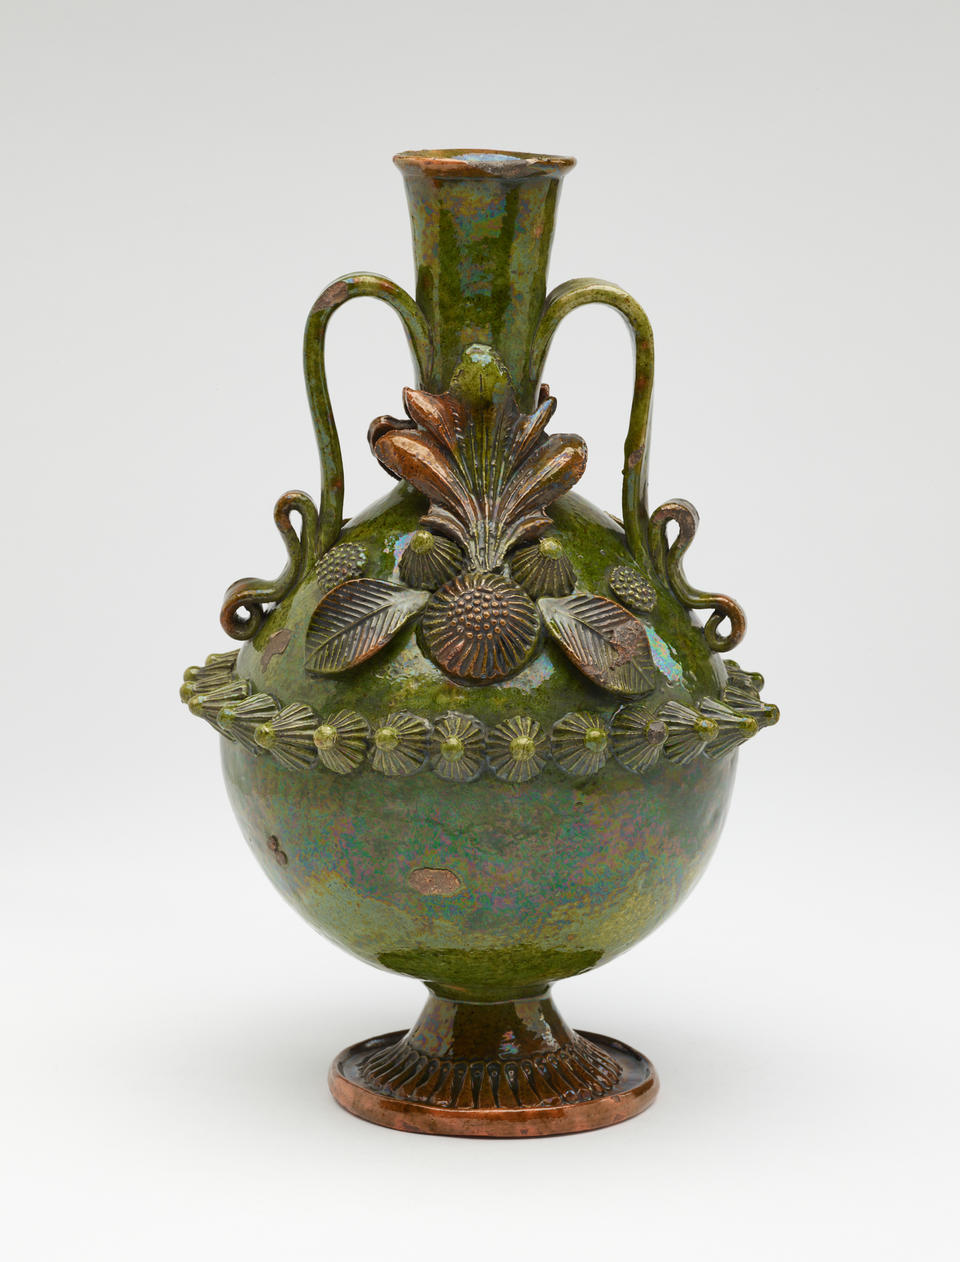 A dark green jug with sculpted decorations, symmetrical decorative handles, and a foot. 